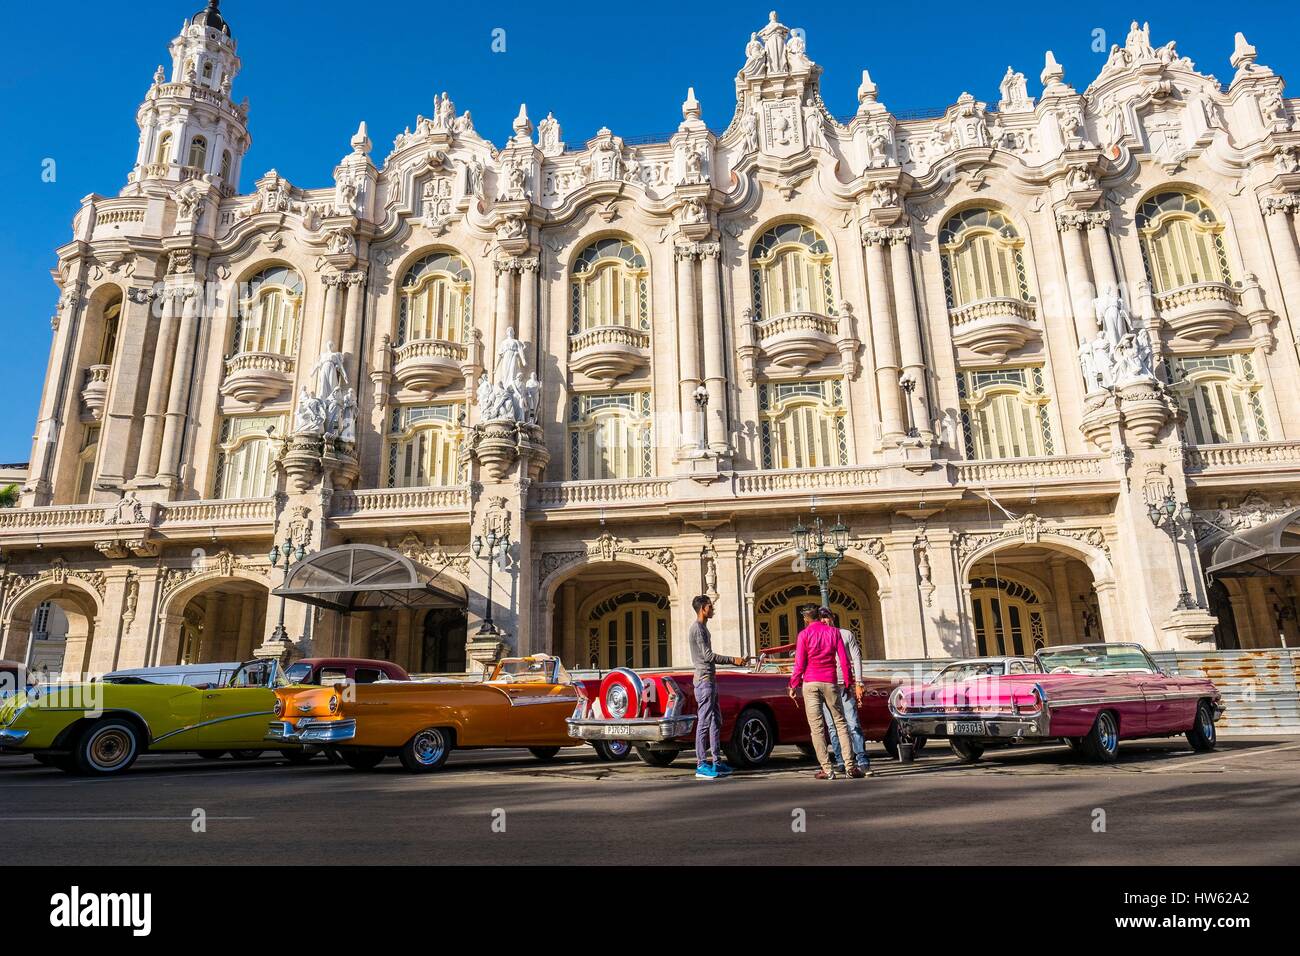 Cuba, Havana, La Habana Vieja district listed as World Heritage by UNESCO, old American cars in the square of Parque Central Stock Photo